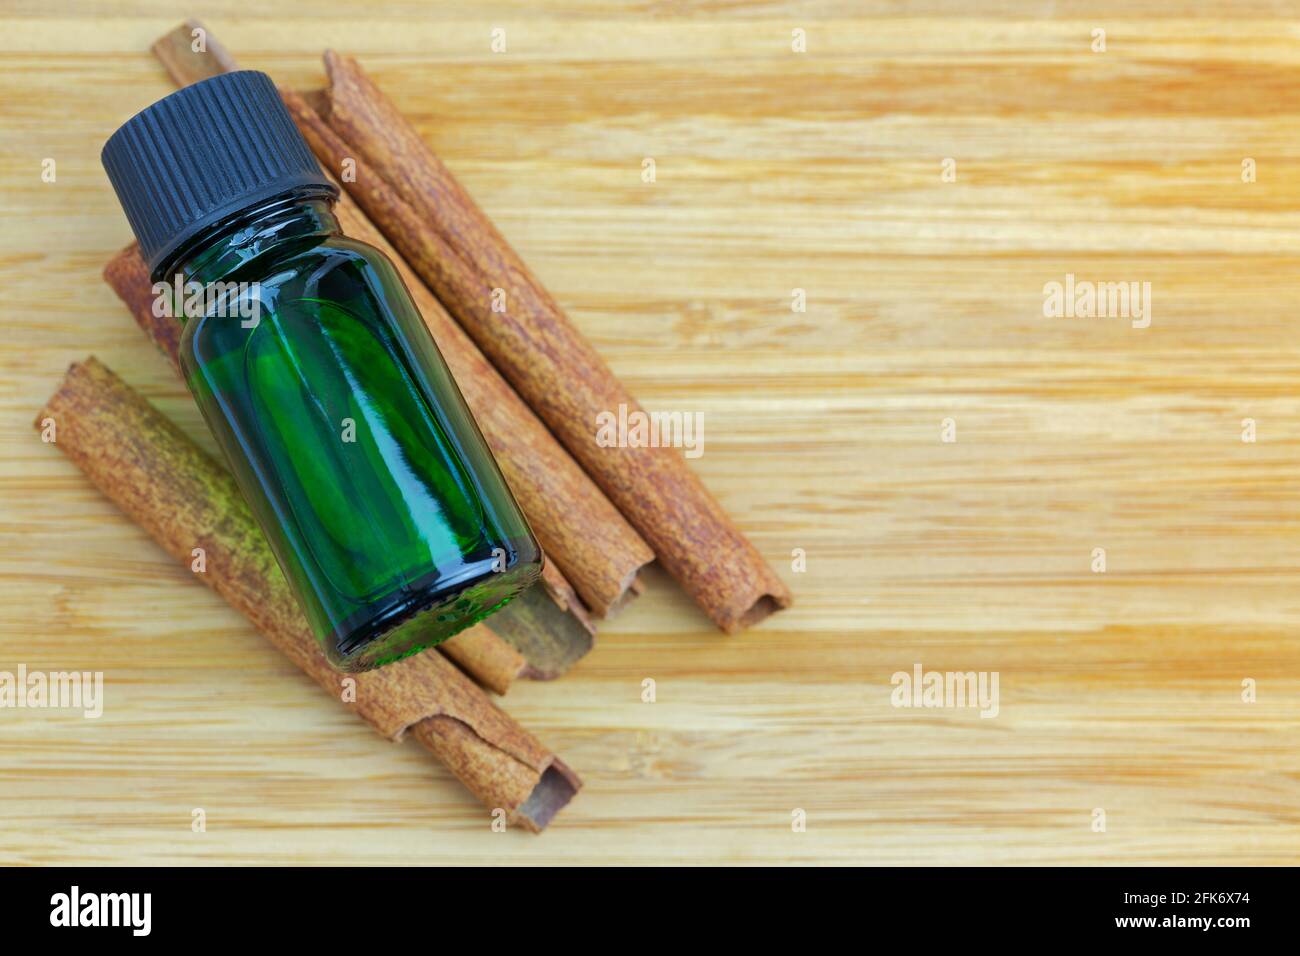 Pure Cinnamon essential concentrate oil extract in green bottle on Cinnamon sticks on wooden background with copyspace Stock Photo